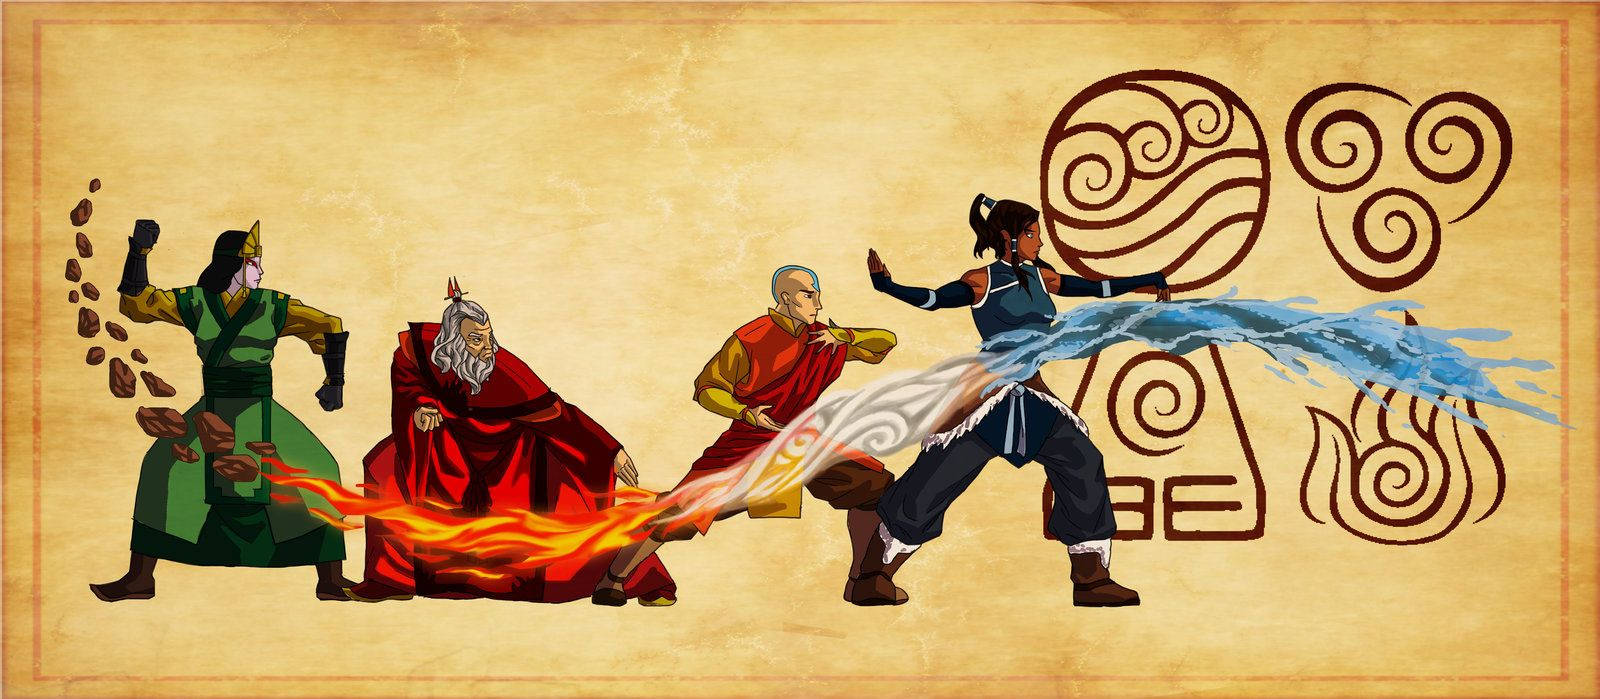 1600X699 Avatar The Last Airbender Wallpaper and Background